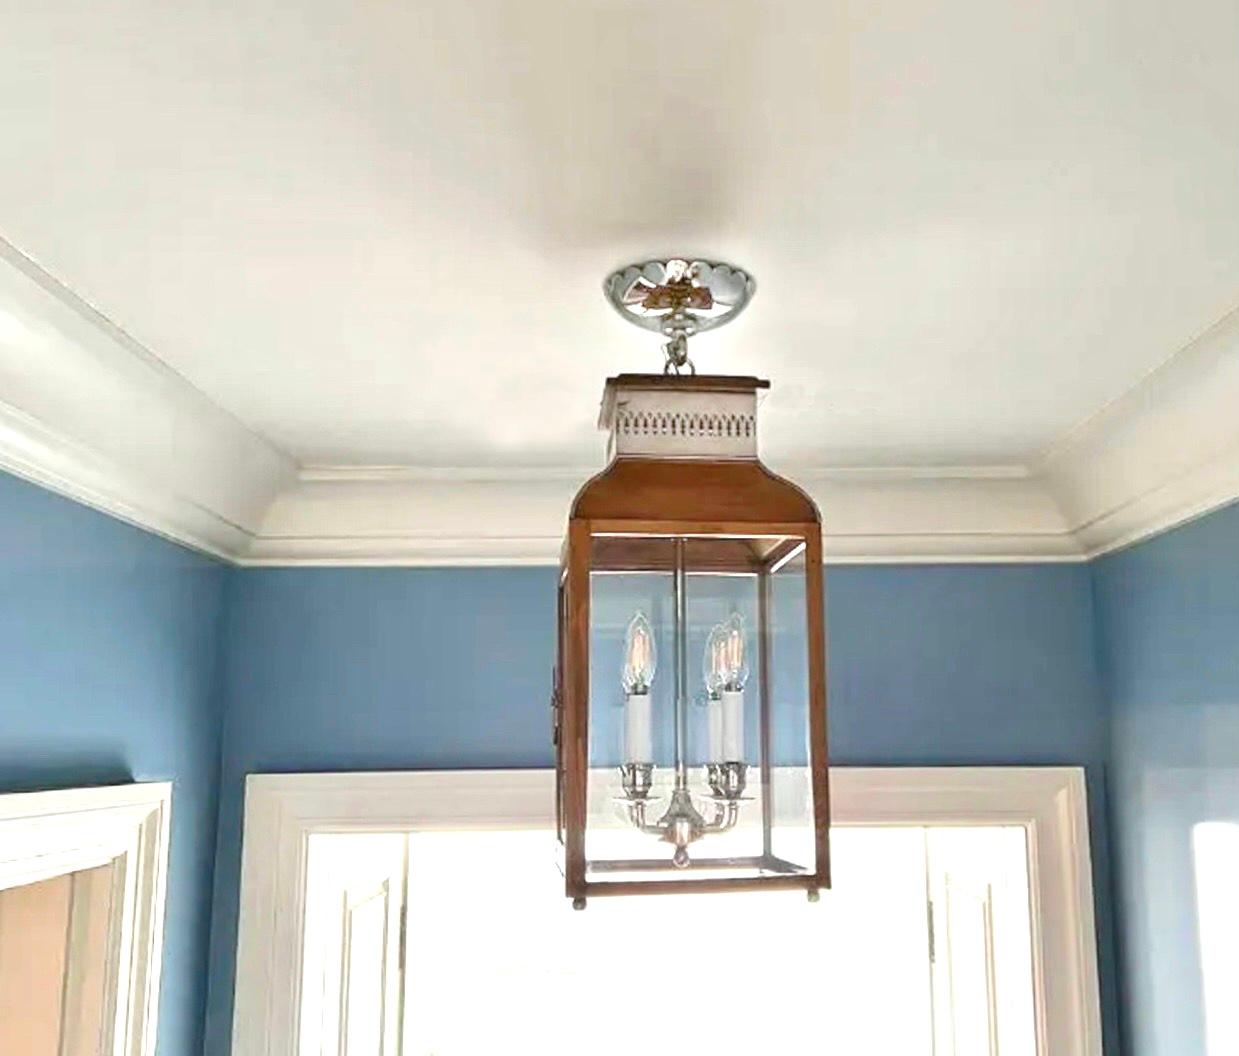 Charles Edwards Custom French Lantern Pendant fixture, Mahogany & Nickel, UK. This Charles Edwards Custom French lantern ceiling light fixture is finished with a scalloped polished nickel canopy, a 4-light candelabra, wood frame, glass panes, and